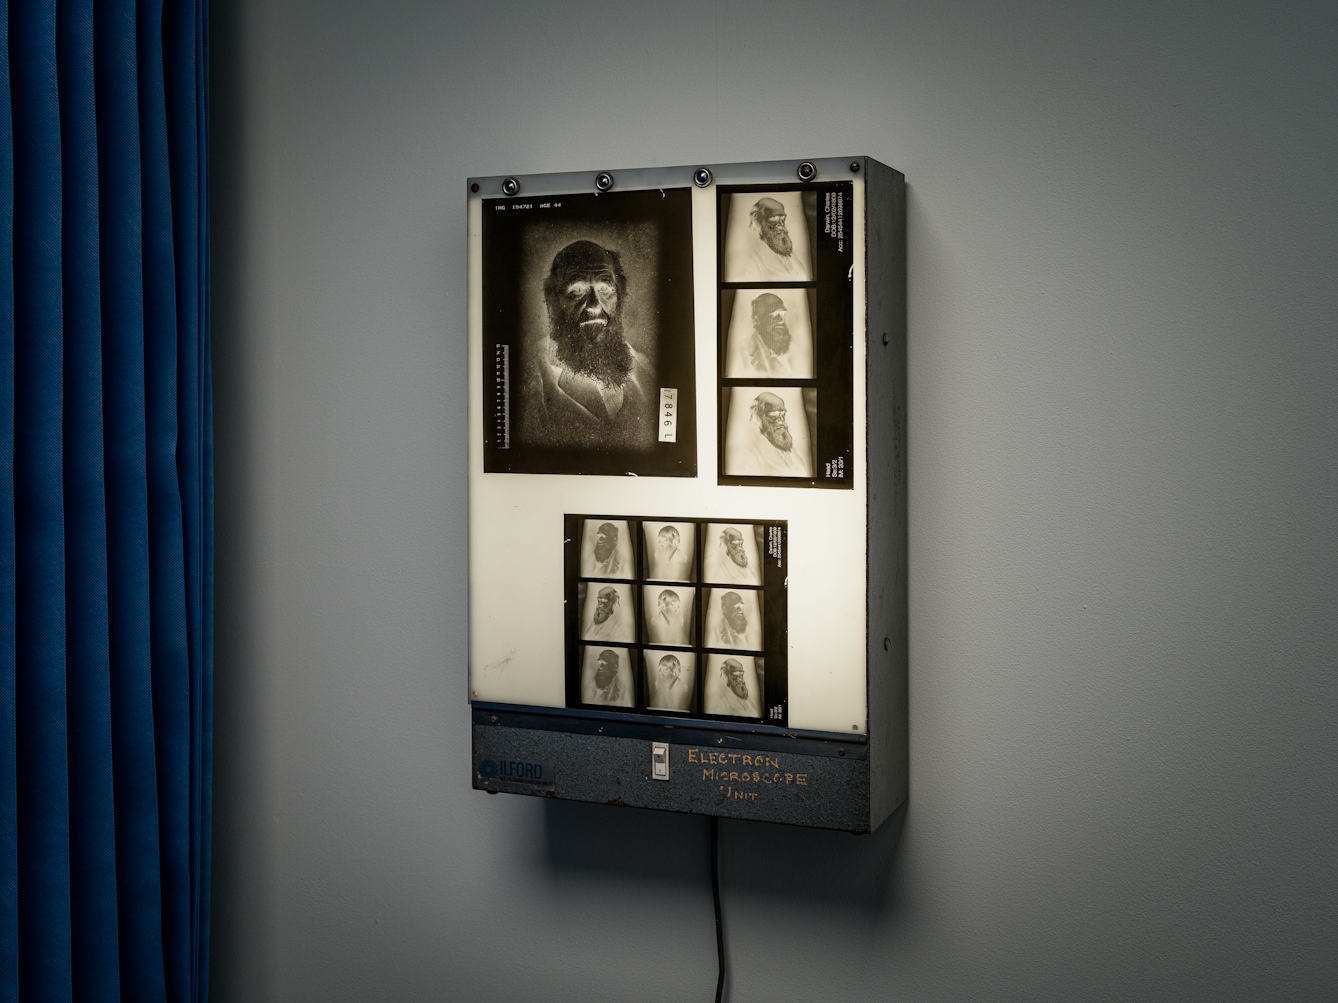 Photograph of an x-ray light box fixed to a white wall. Beside the light box in the edge of blue medical ward curtains. On the light box are several x-rays made up of the inverted portraits of Charles Darwin.